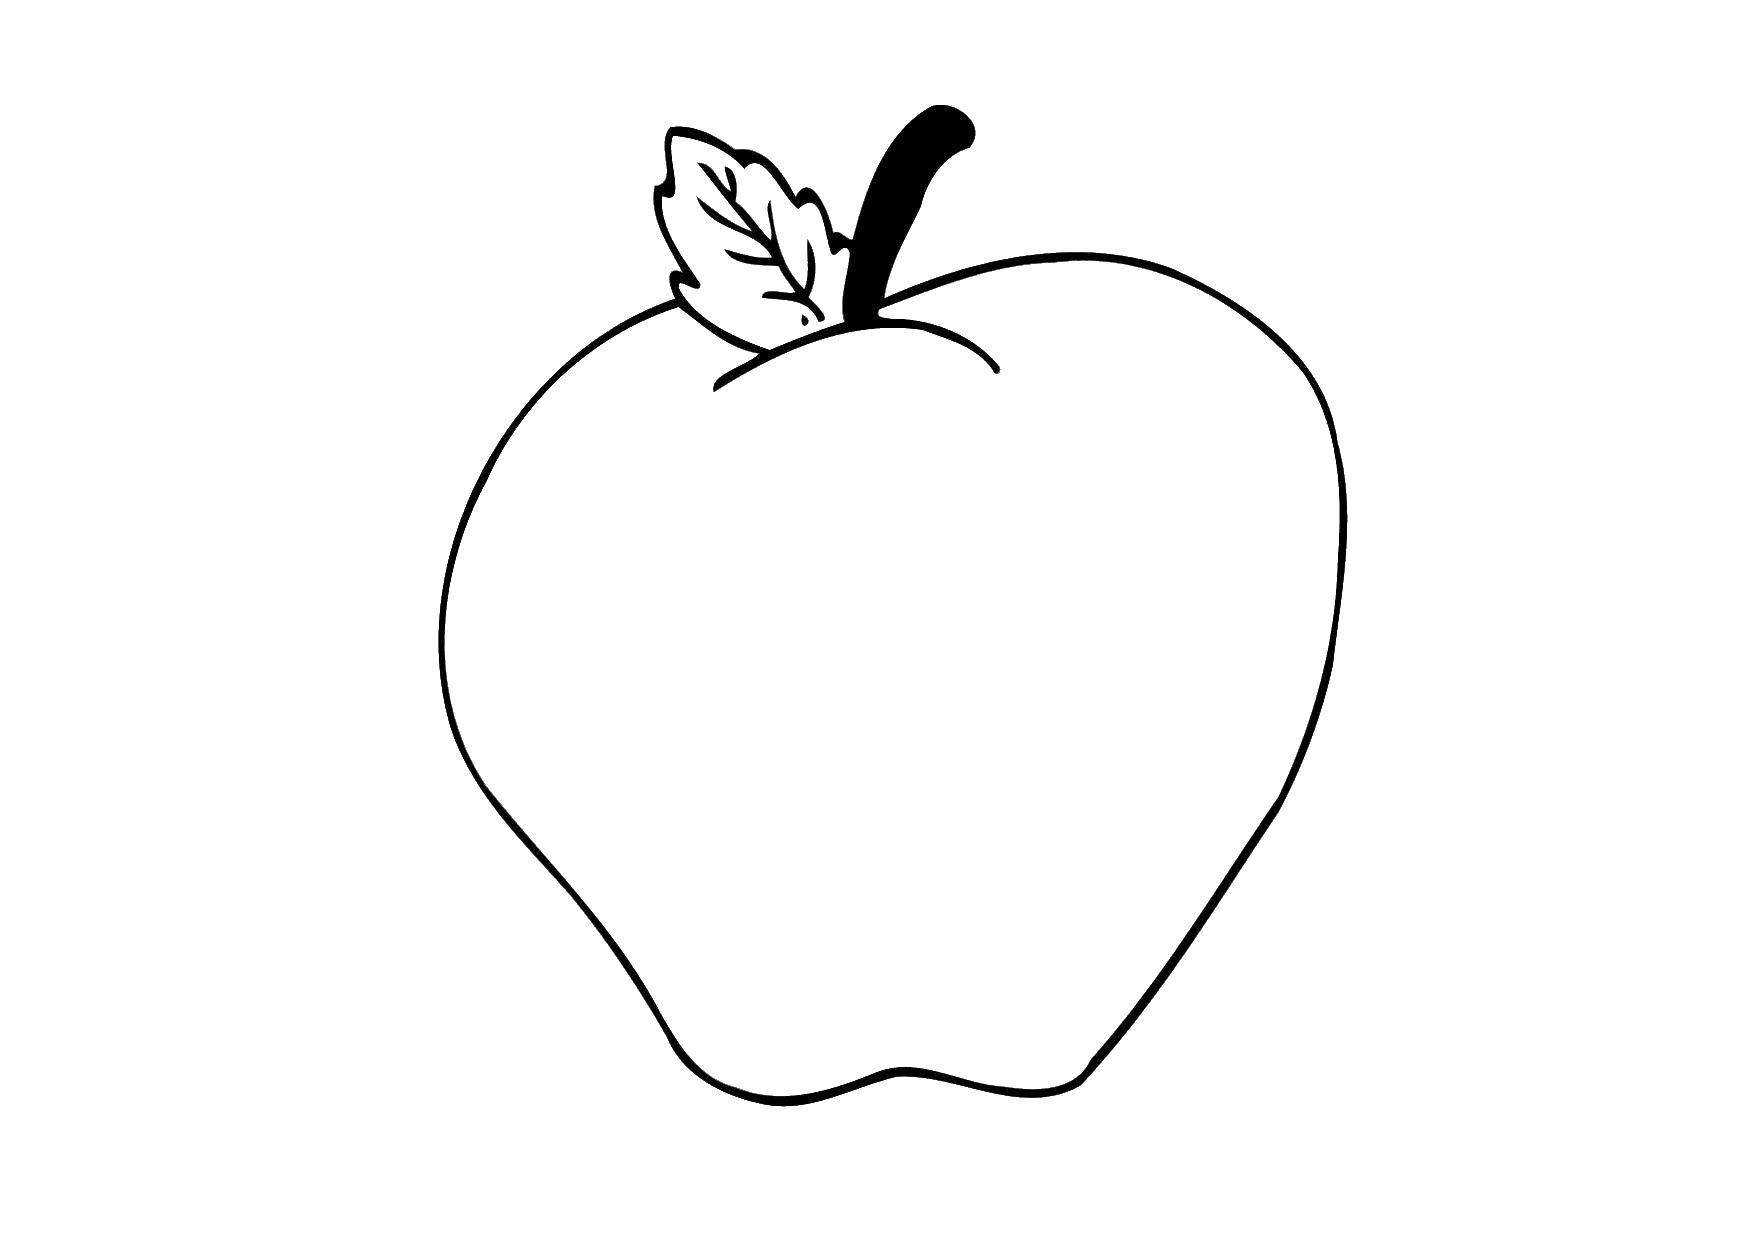 Coloring Apple. Category coloring. Tags:  fruit, apples.